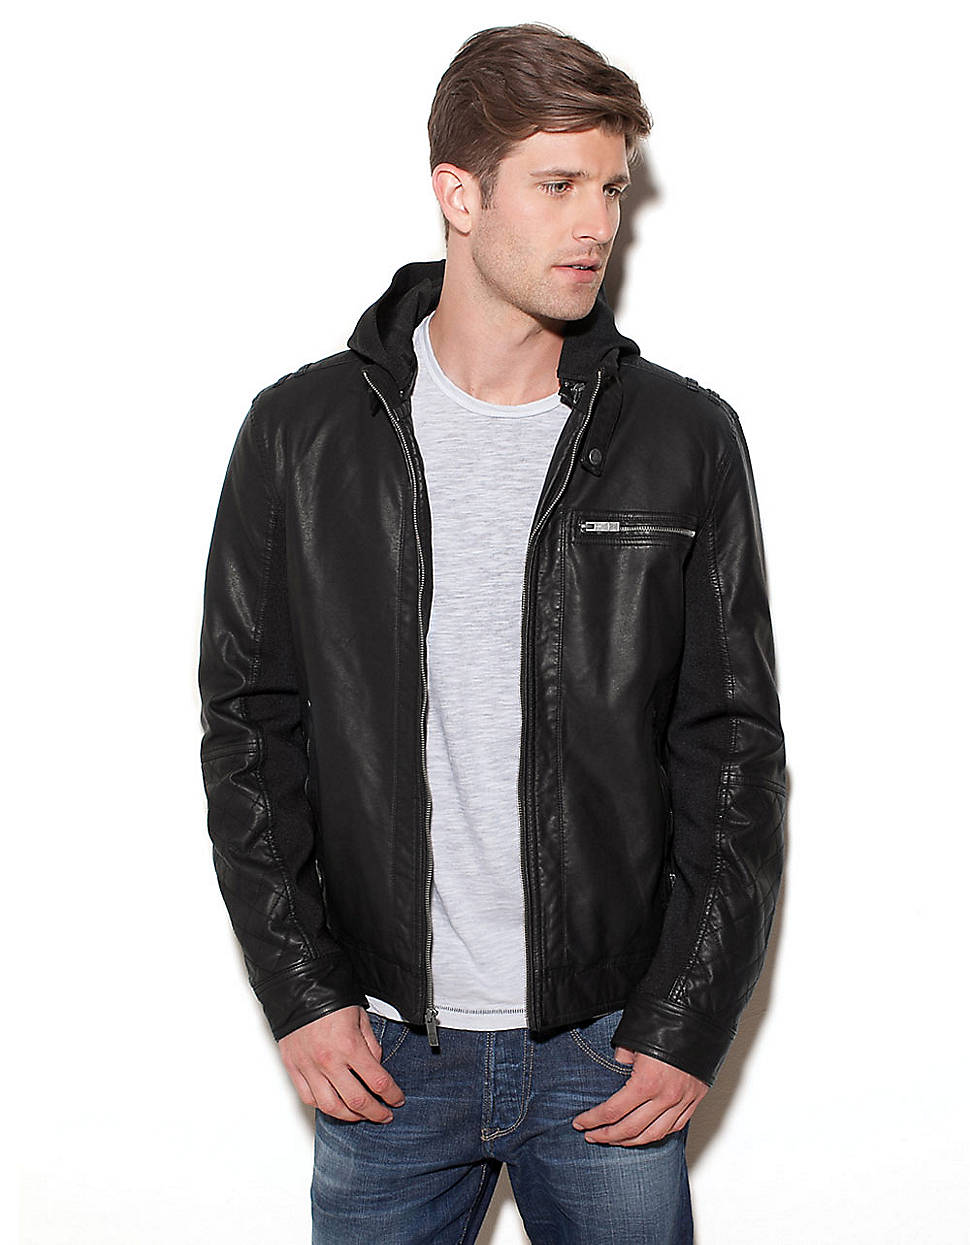 Guess Patterson Faux Leather Jacket in Black for Men - Lyst